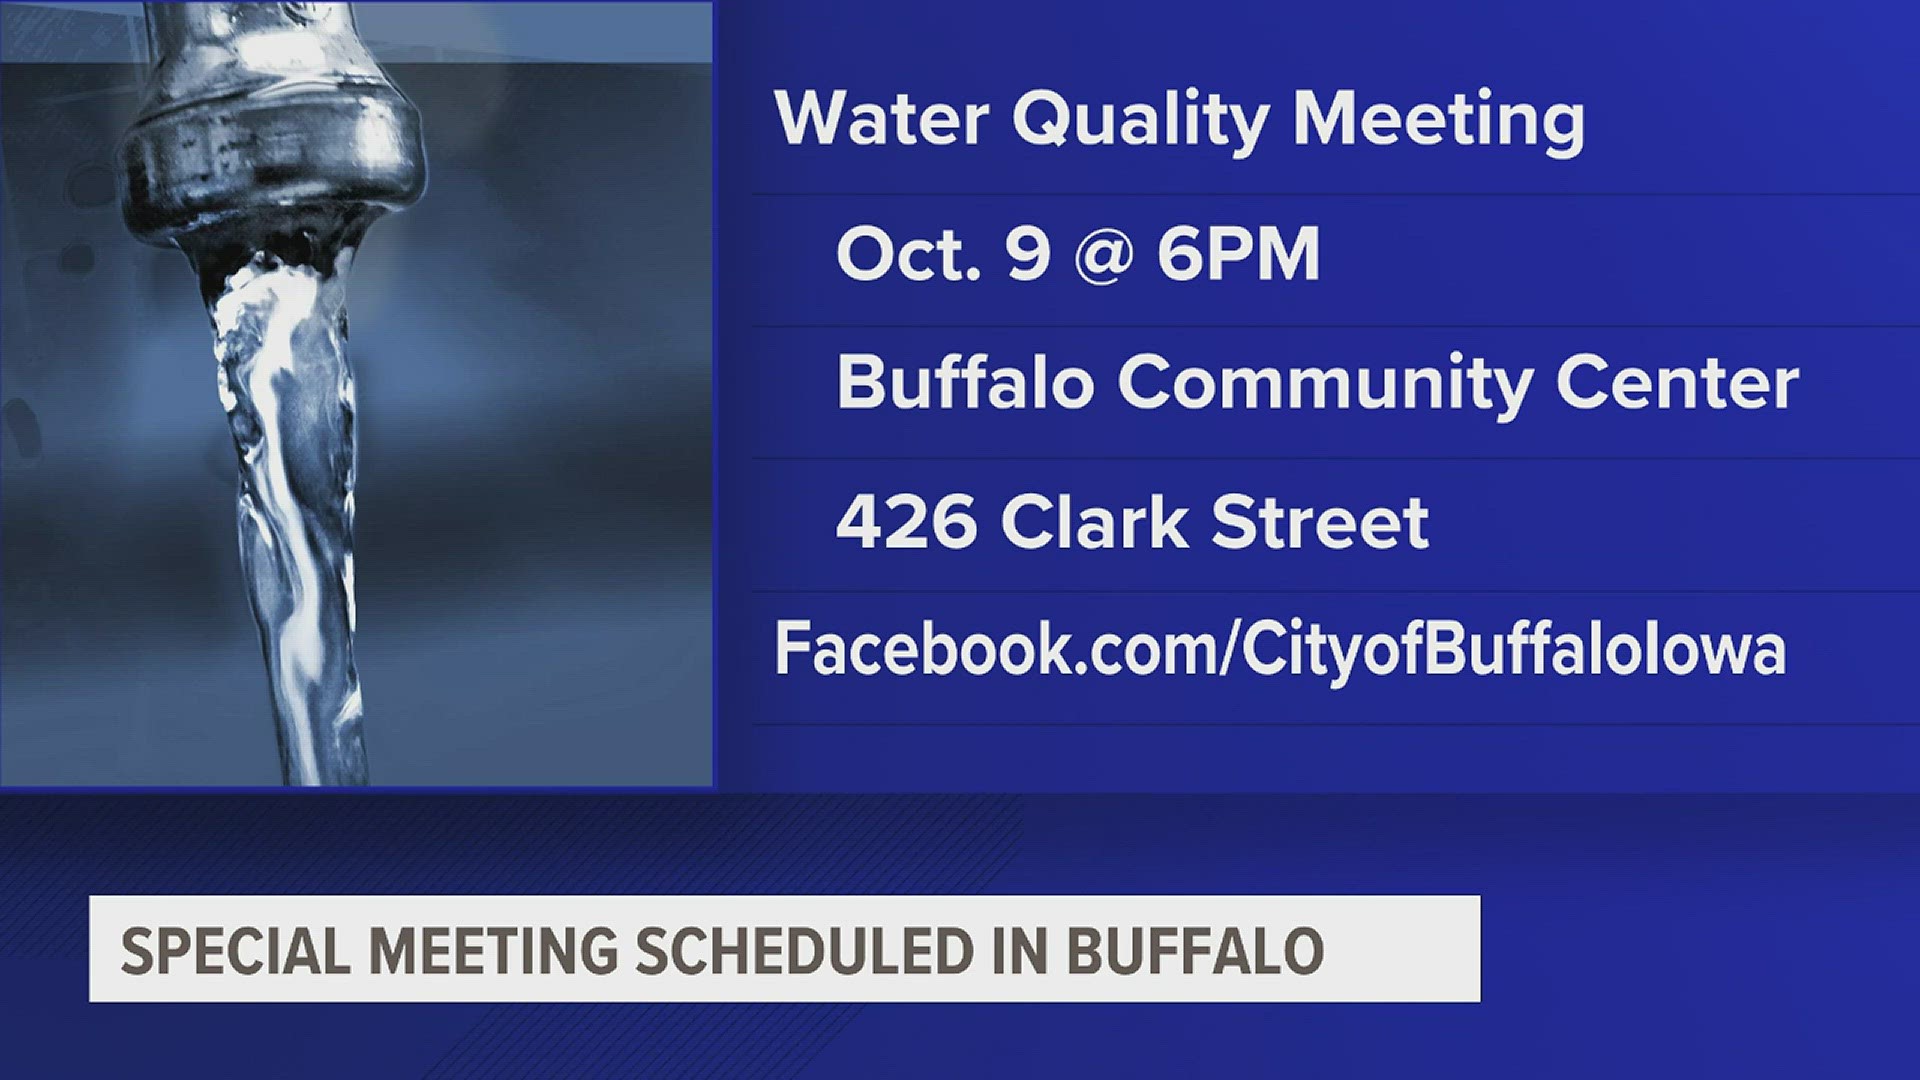 The meeting will be held at the Buffalo Community Center on Monday, Oct. 9 at 6 p.m.